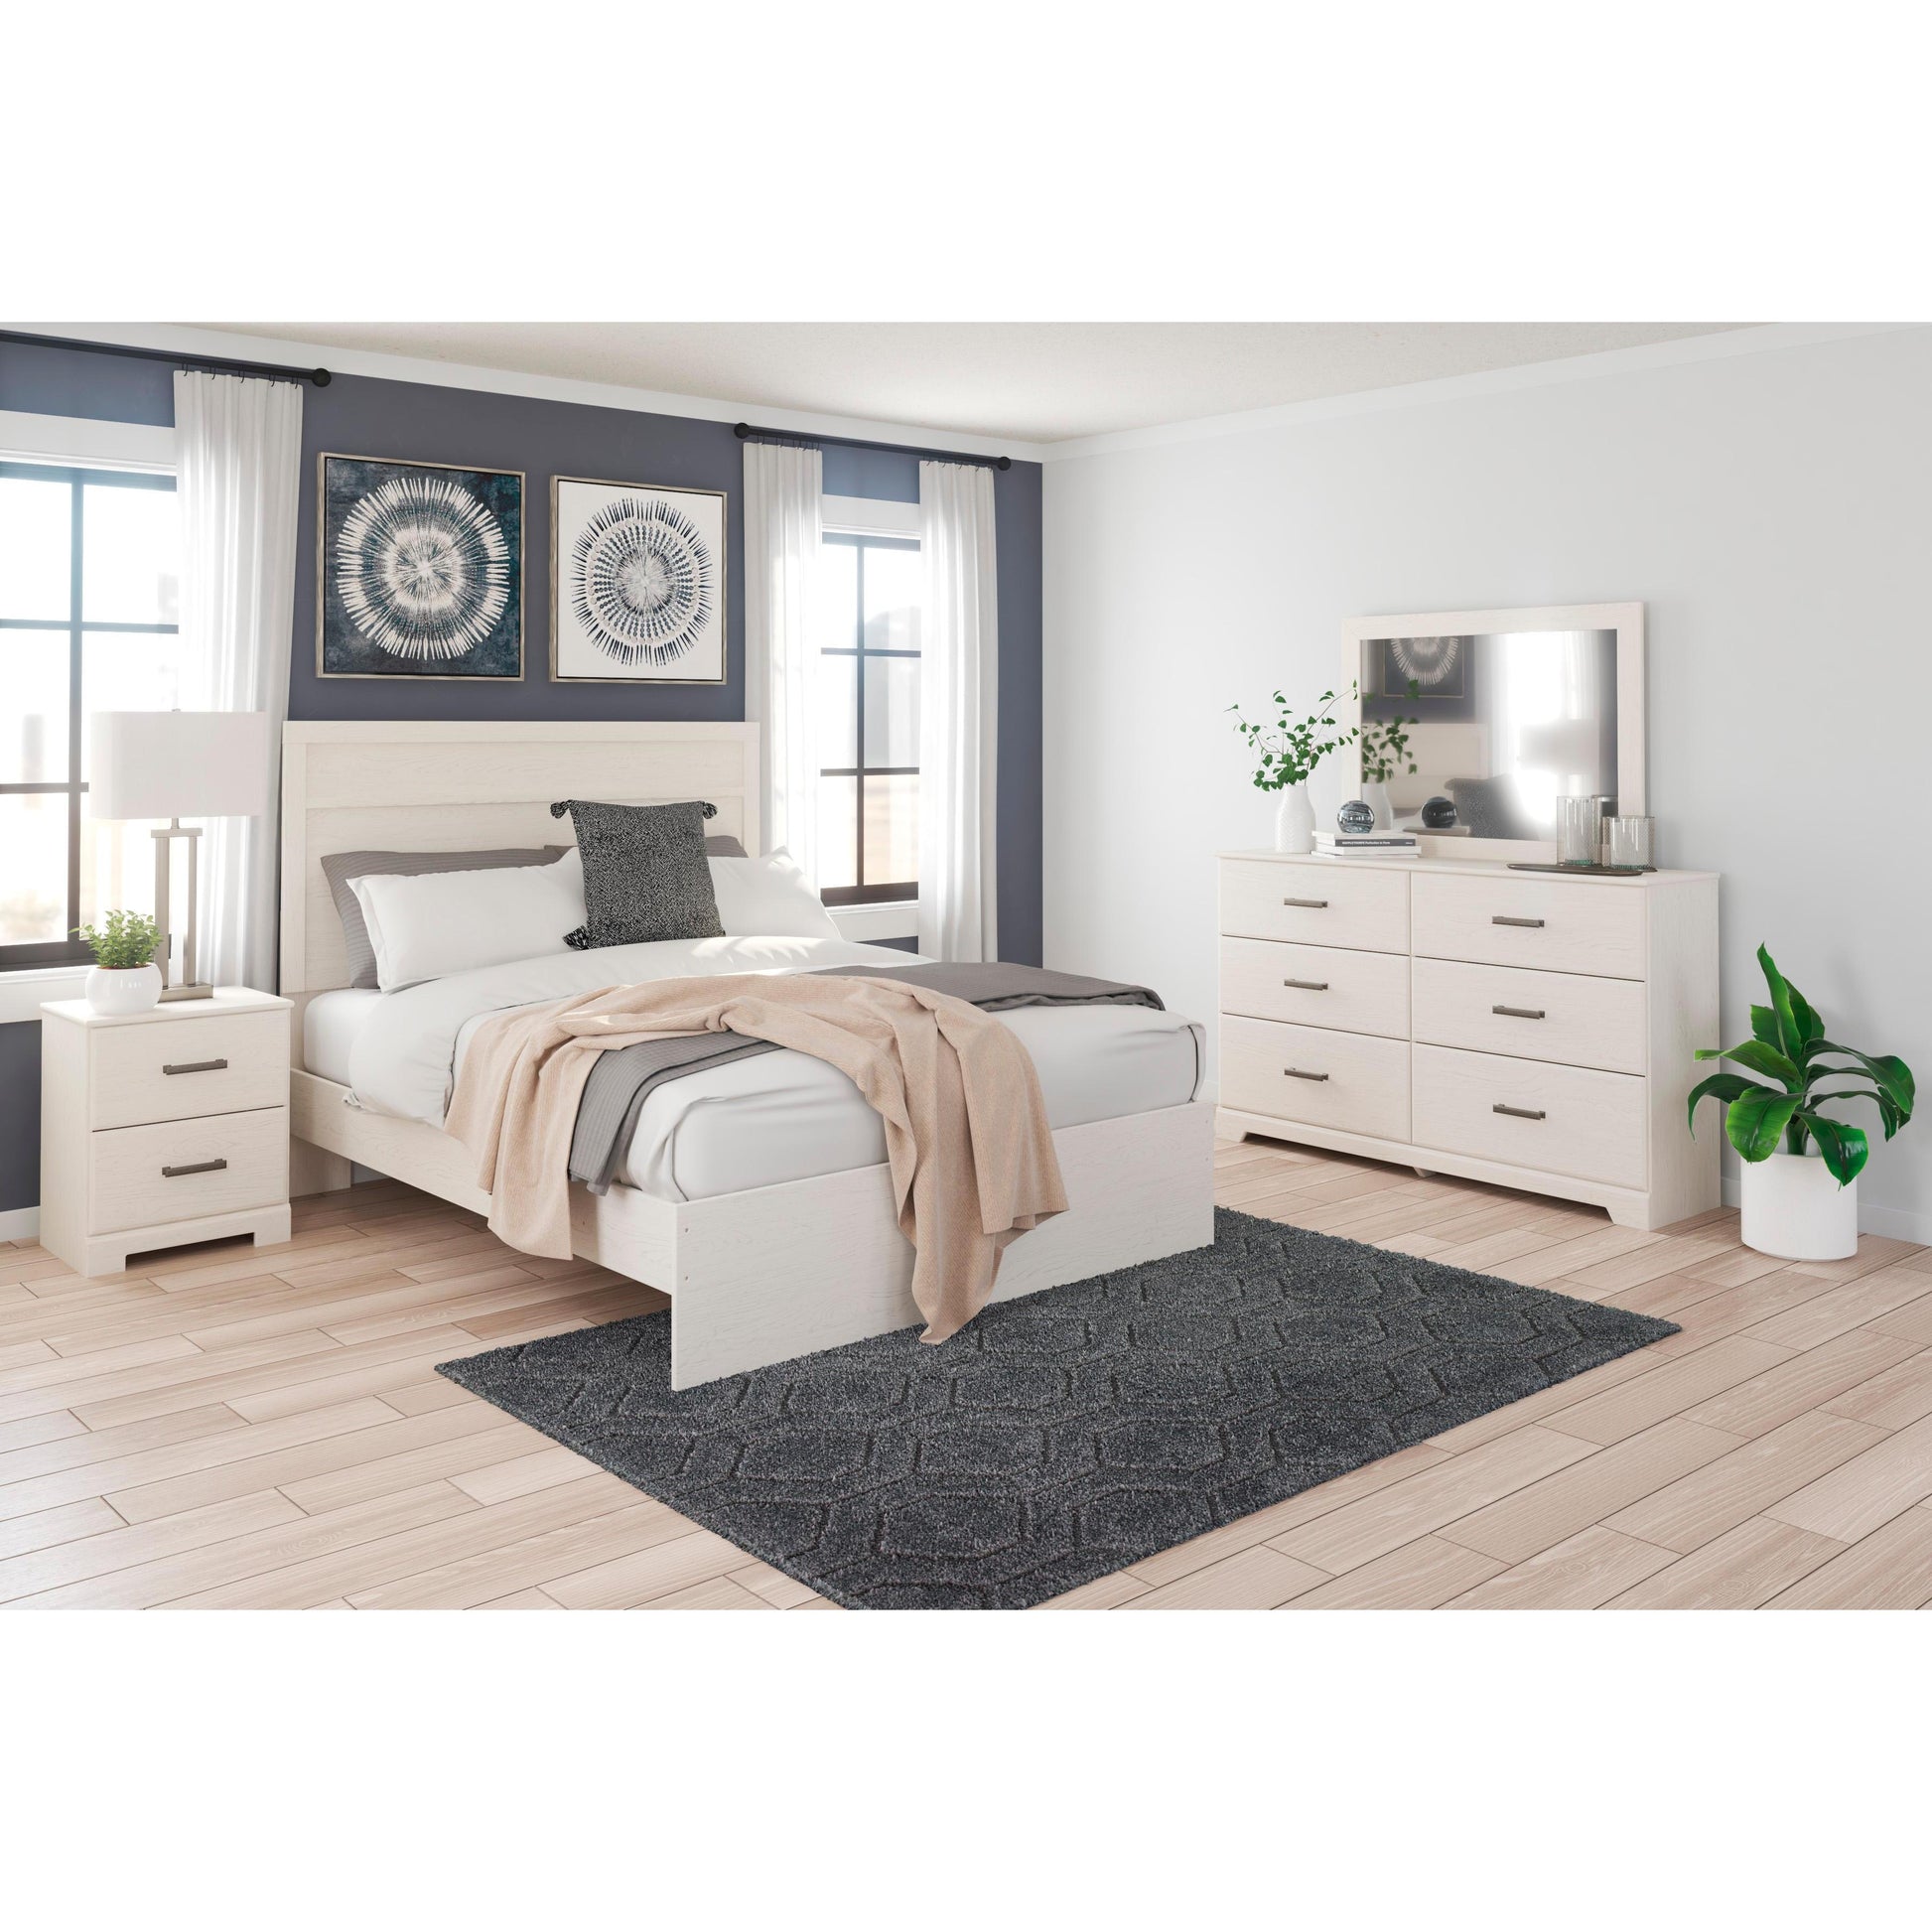 Signature Design by Ashley Stelsie B2588 6 pc Queen Panel Bedroom Set IMAGE 1